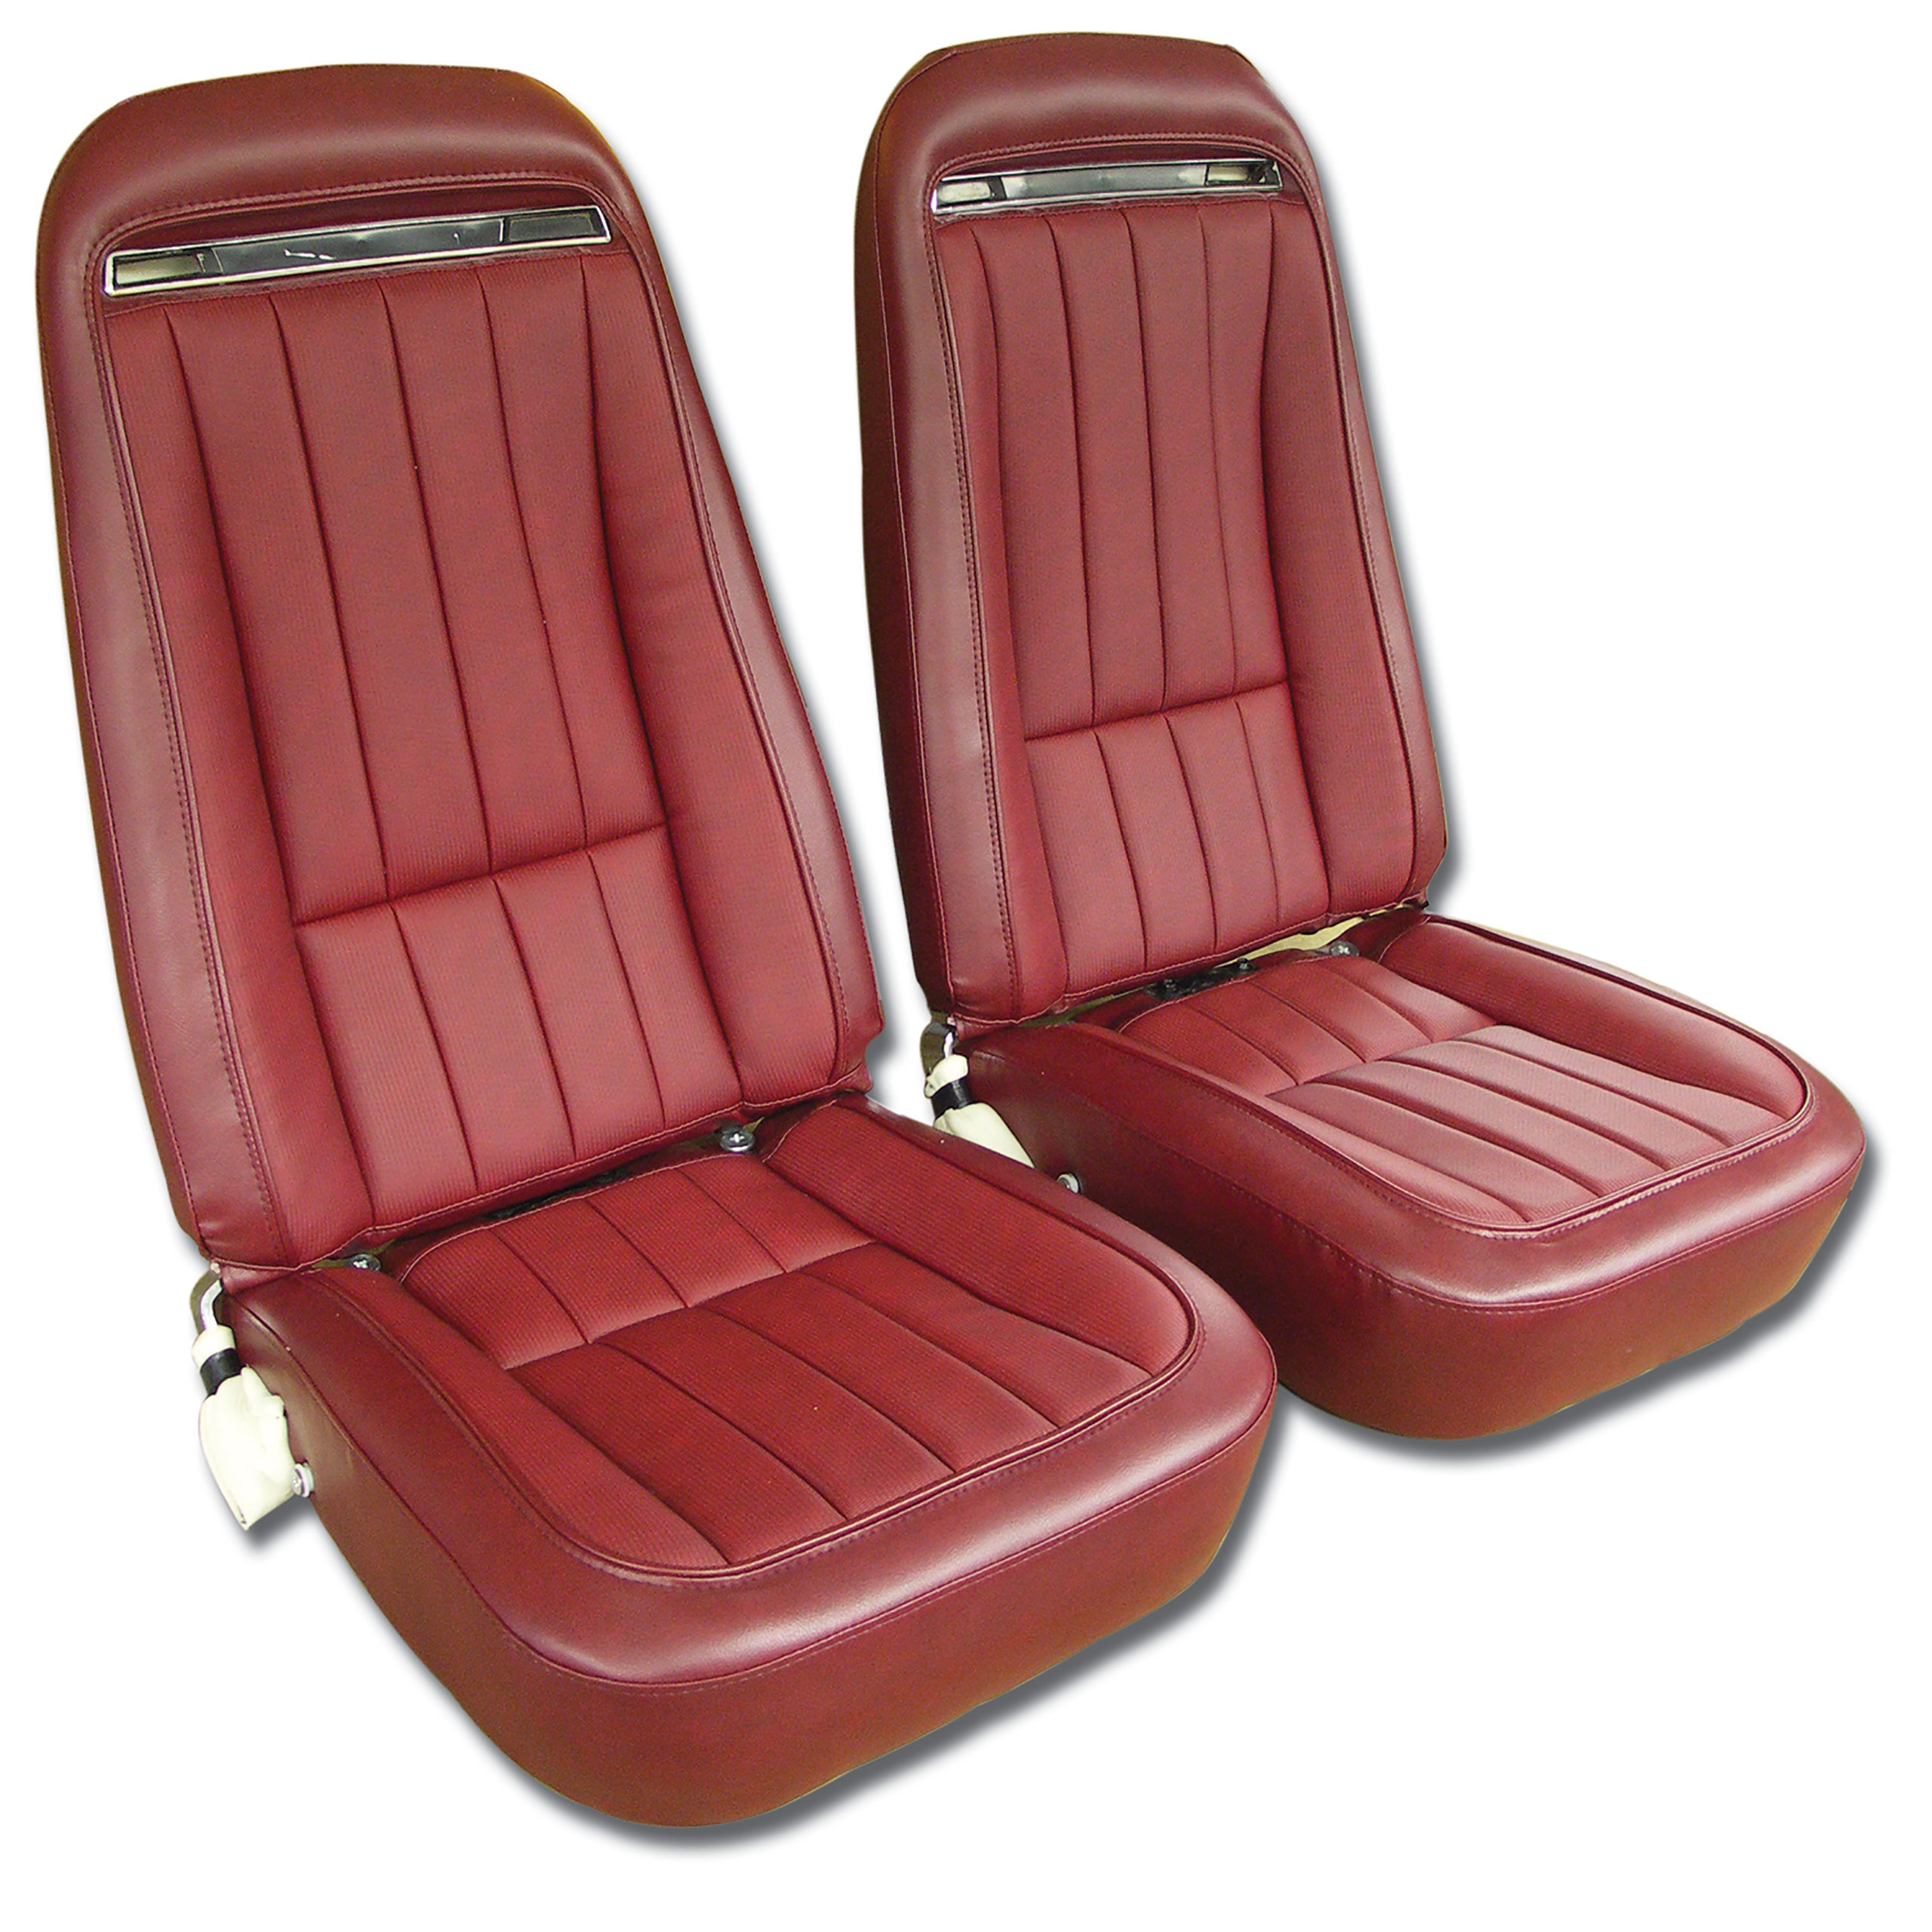 1973-1974 C3 Corvette Mounted Seats Oxblood "Leather-Like" Vinyl With Shoulder Harness